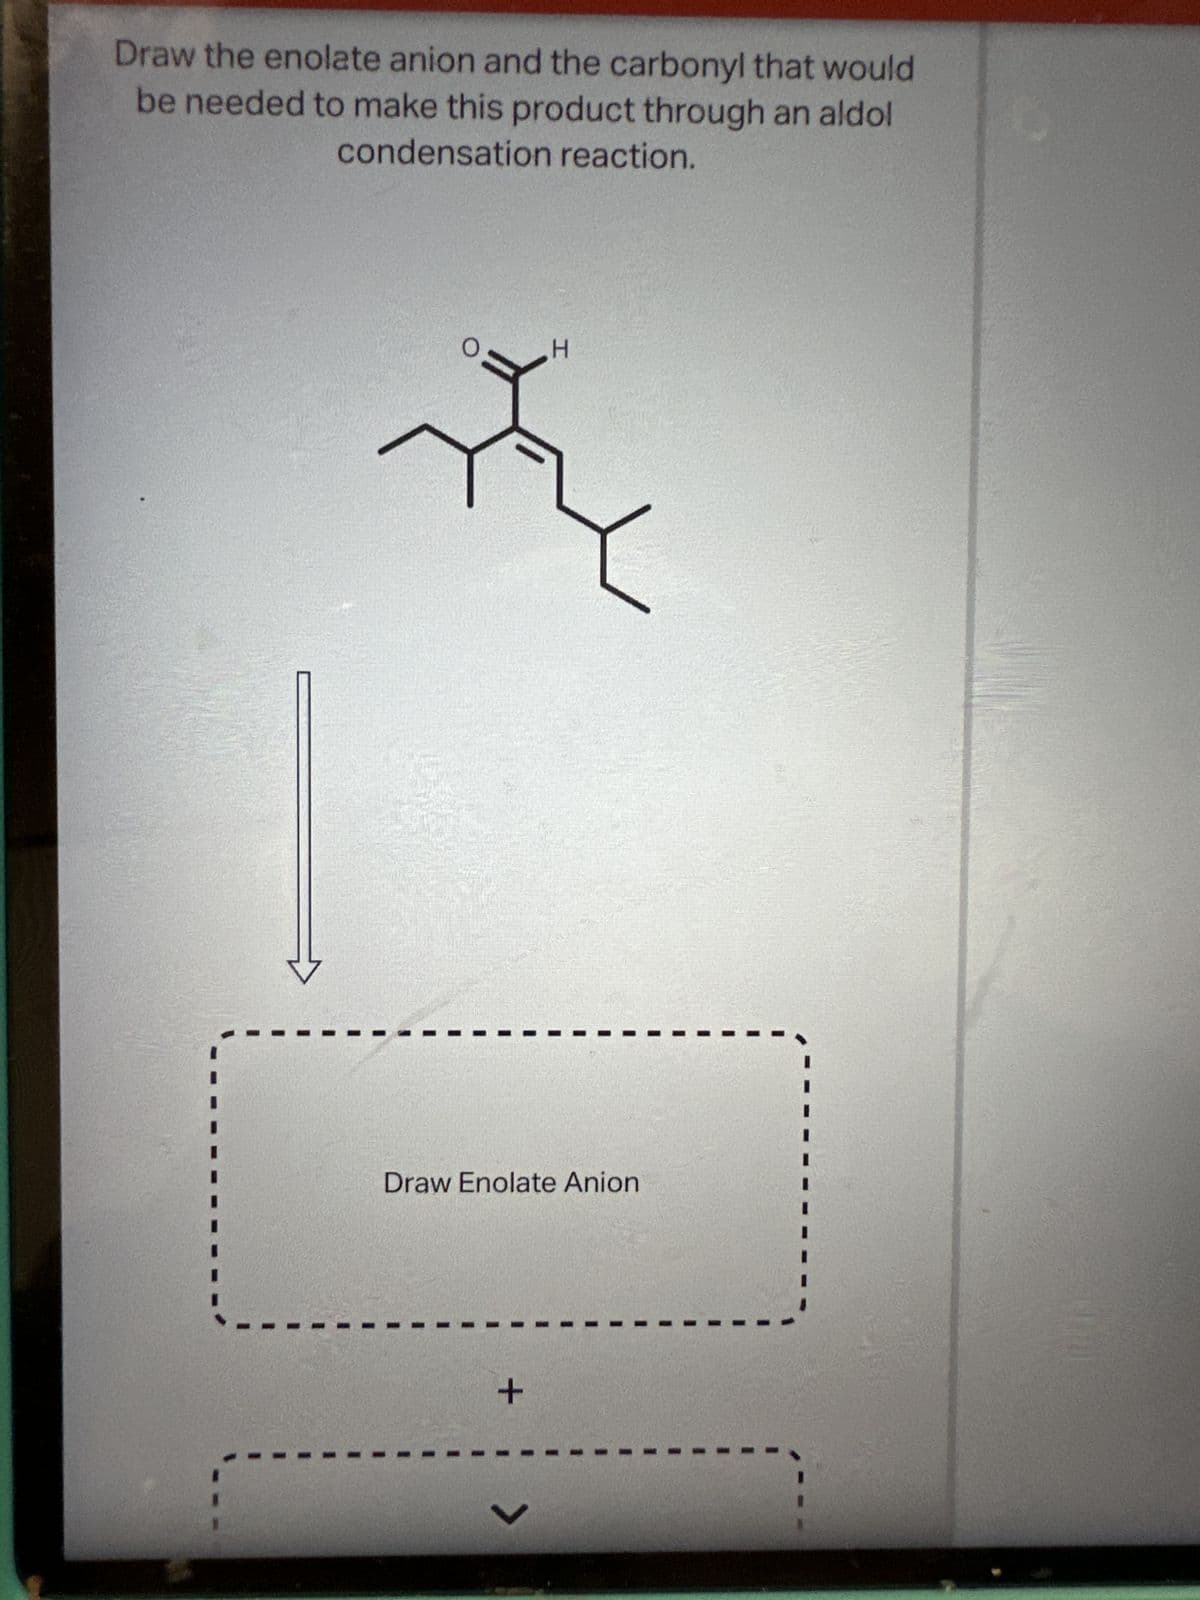 Draw the enolate anion and the carbonyl that would
be needed to make this product through an aldol
condensation reaction.
Draw Enolate Anion
+
I
V